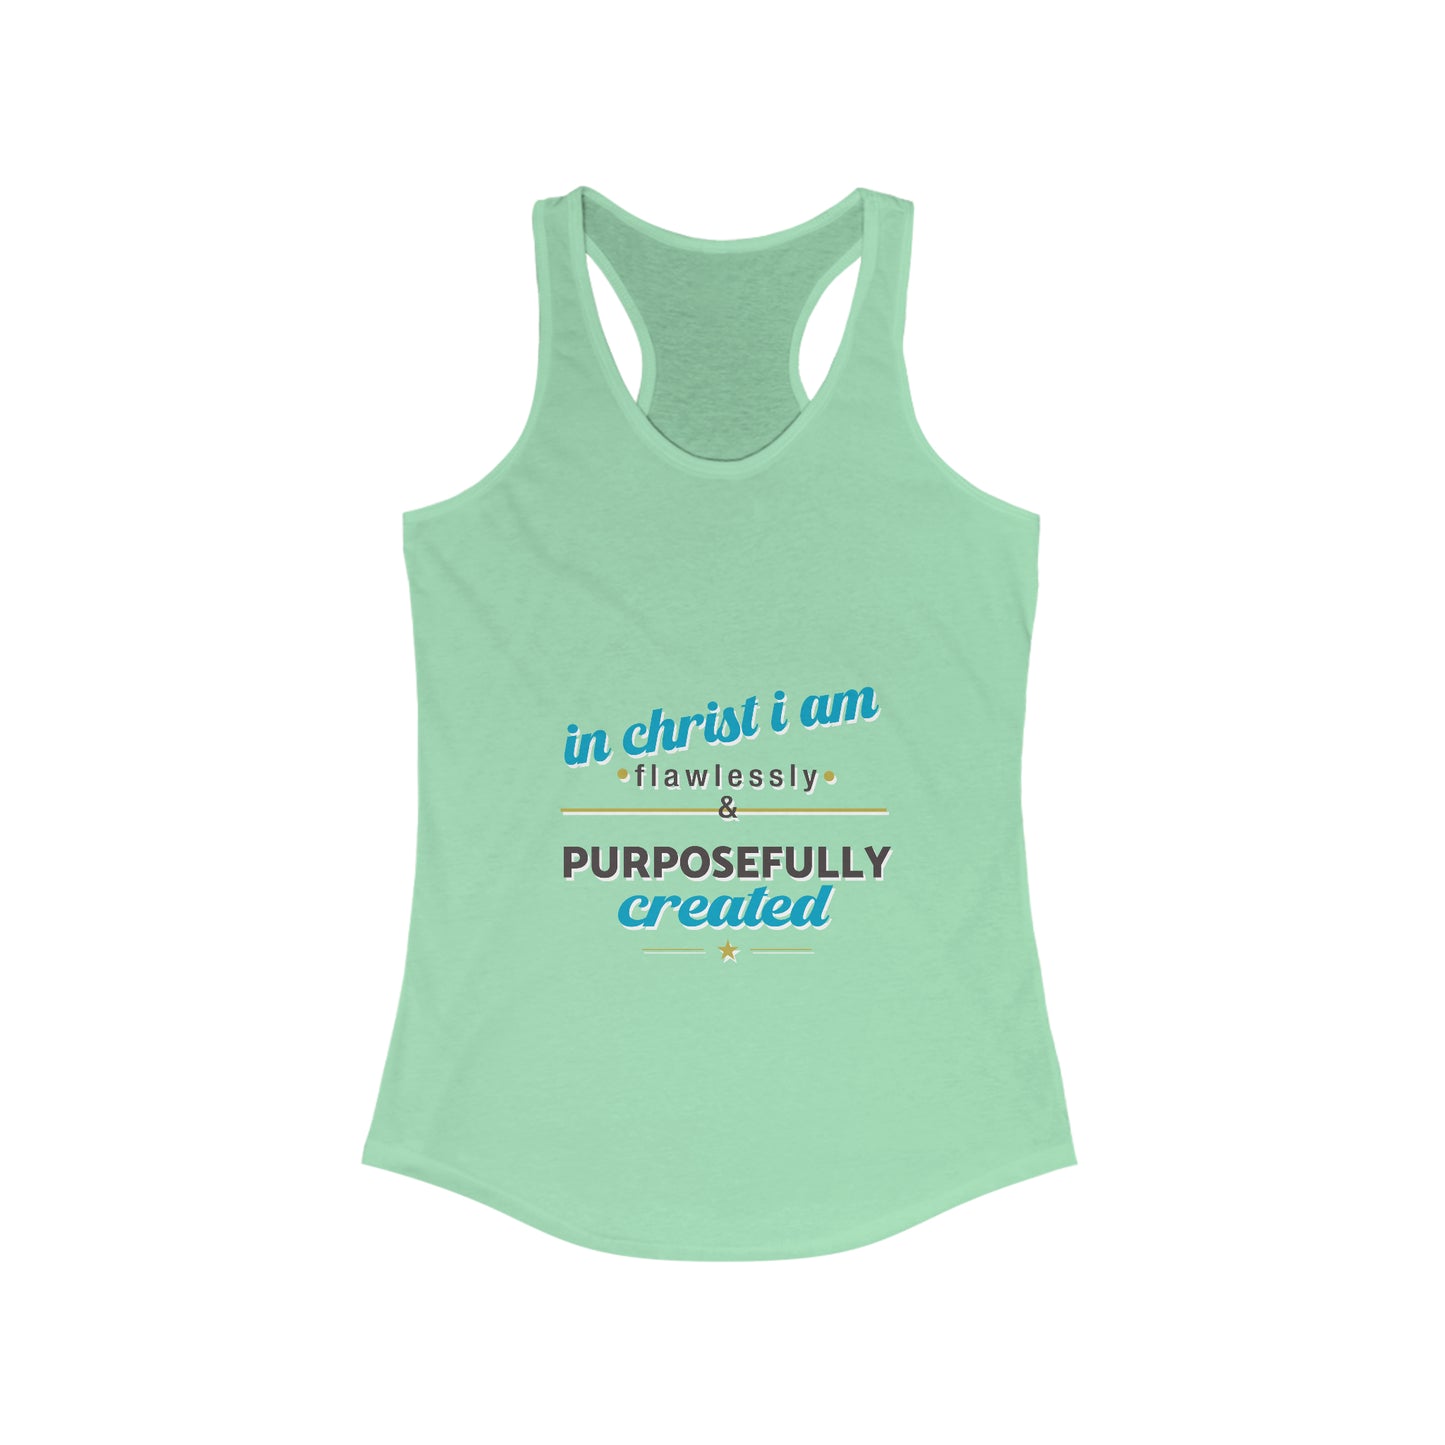 In Christ I Am Flawlessly & Purposefully Created Women’s Slim fit tank-top